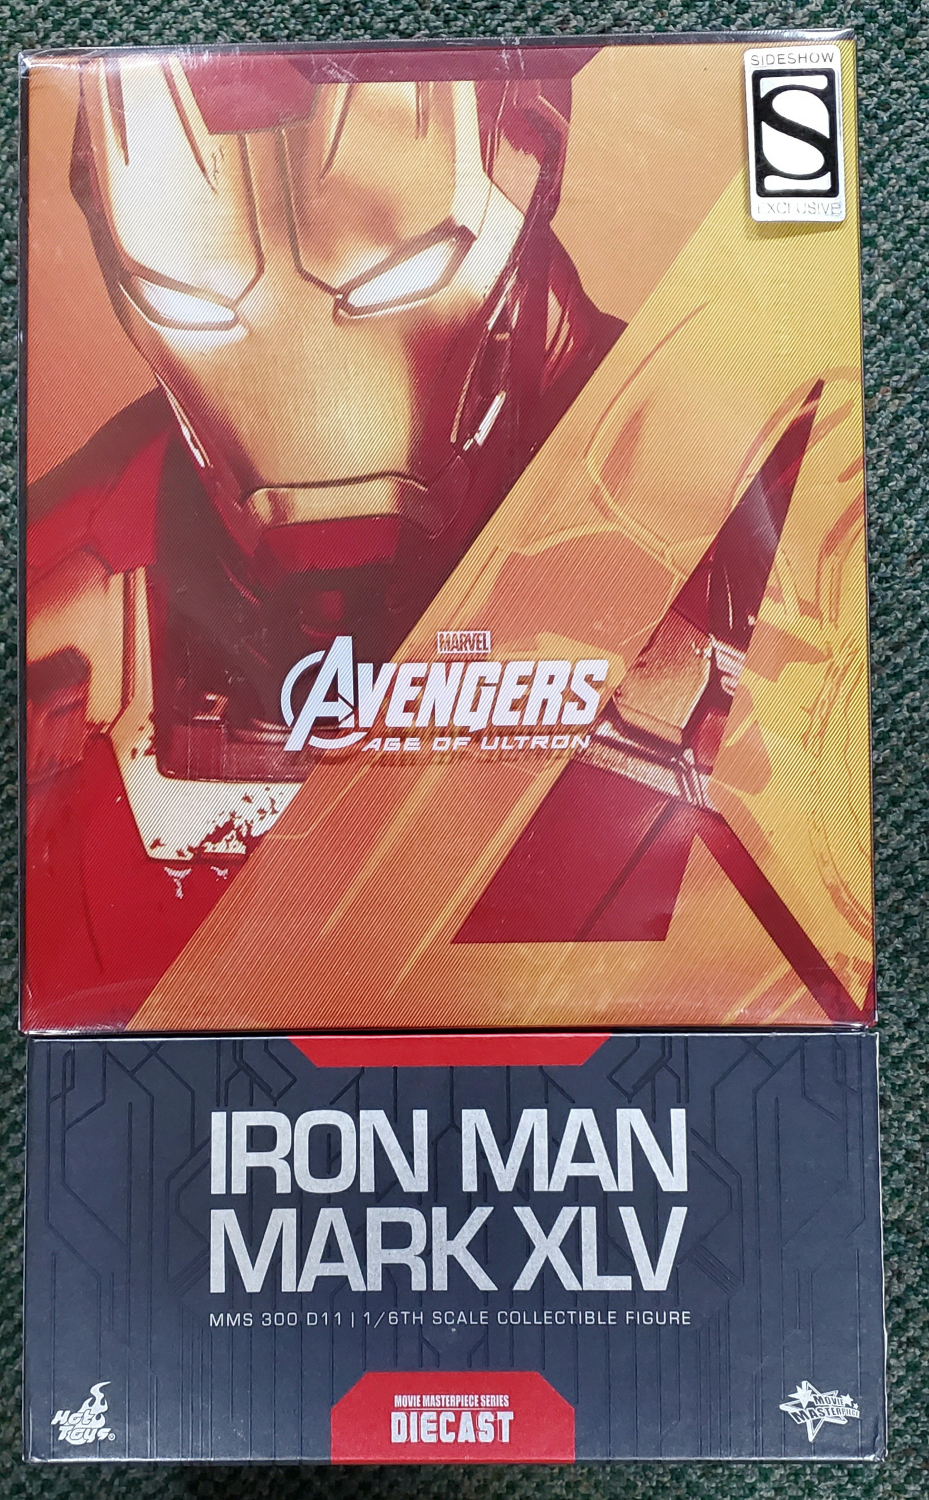 Hot Toys Sideshow Exclusive Avengers: Age of Ultron Diecast Iron Man Mark XLV 1:6 Scale Figure 1